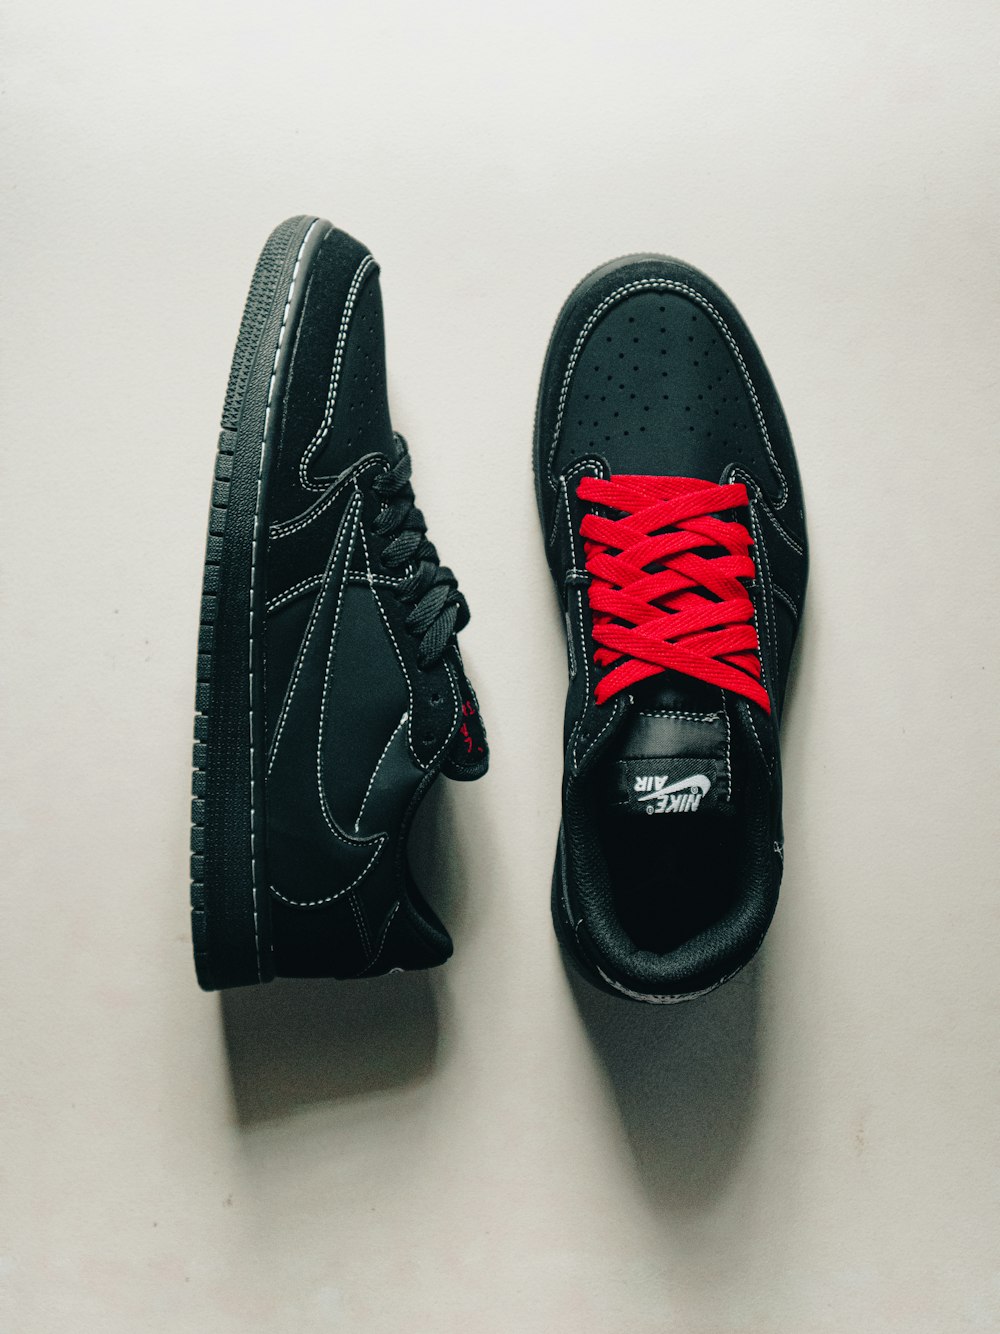 a pair of black sneakers with red laces